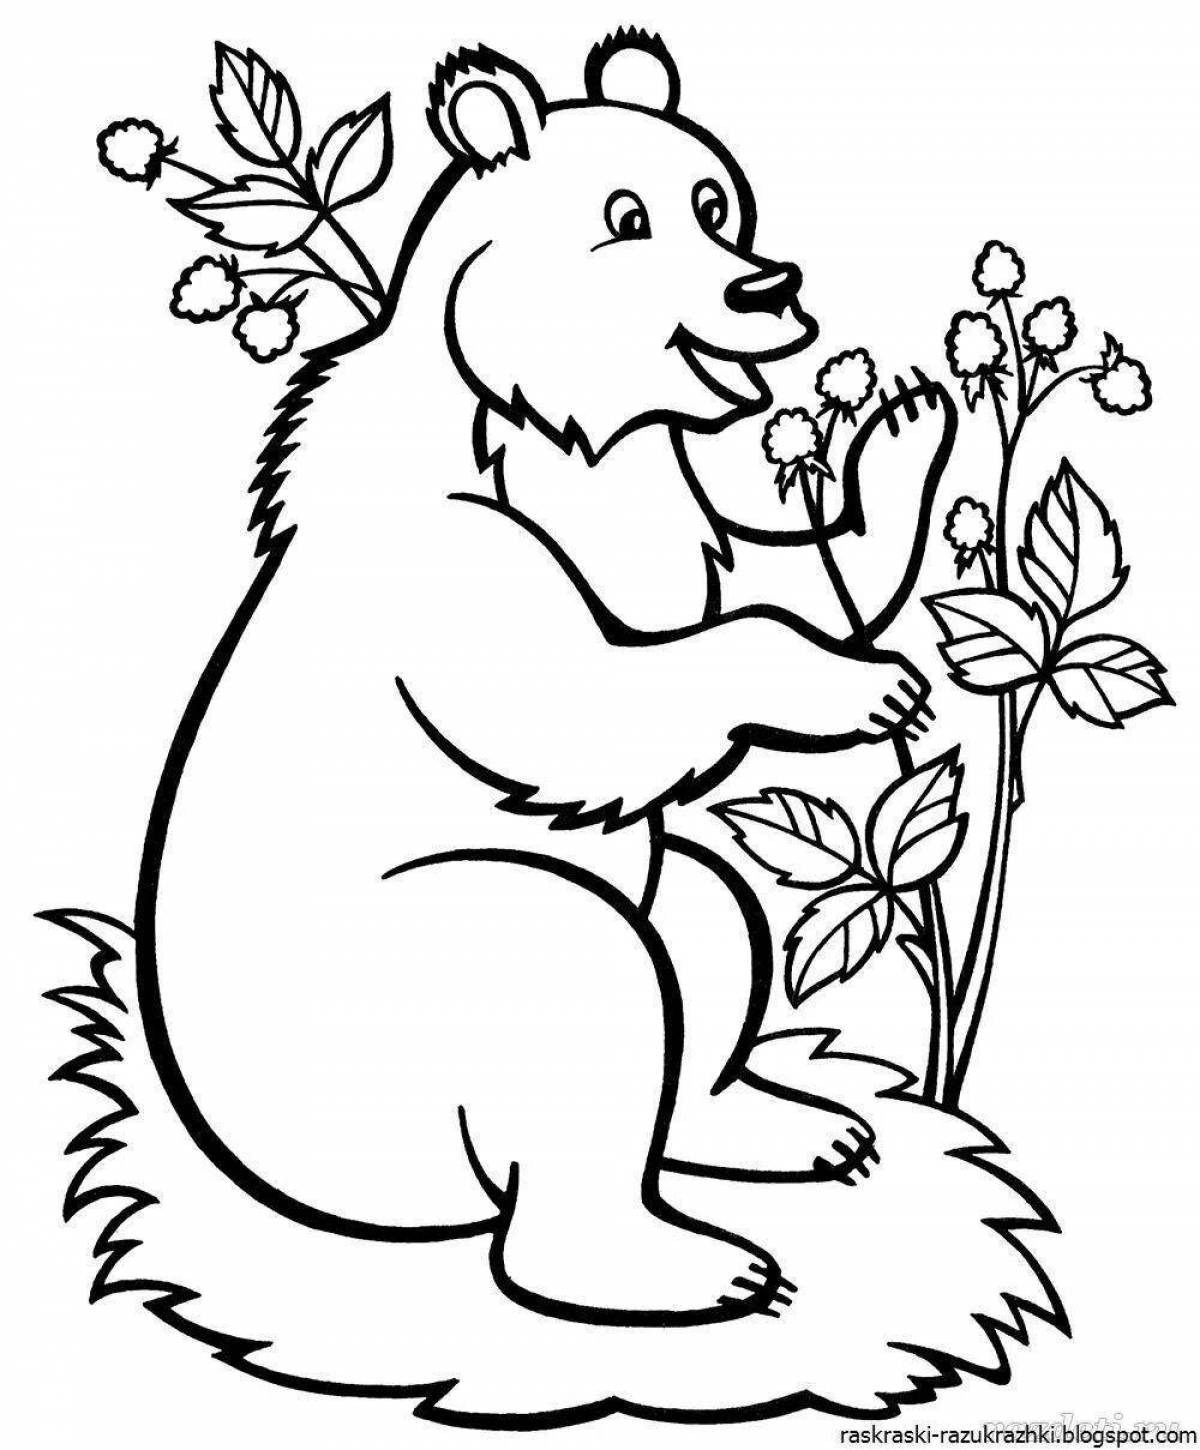 Fun coloring pages of forest animals for children 3-4 years old